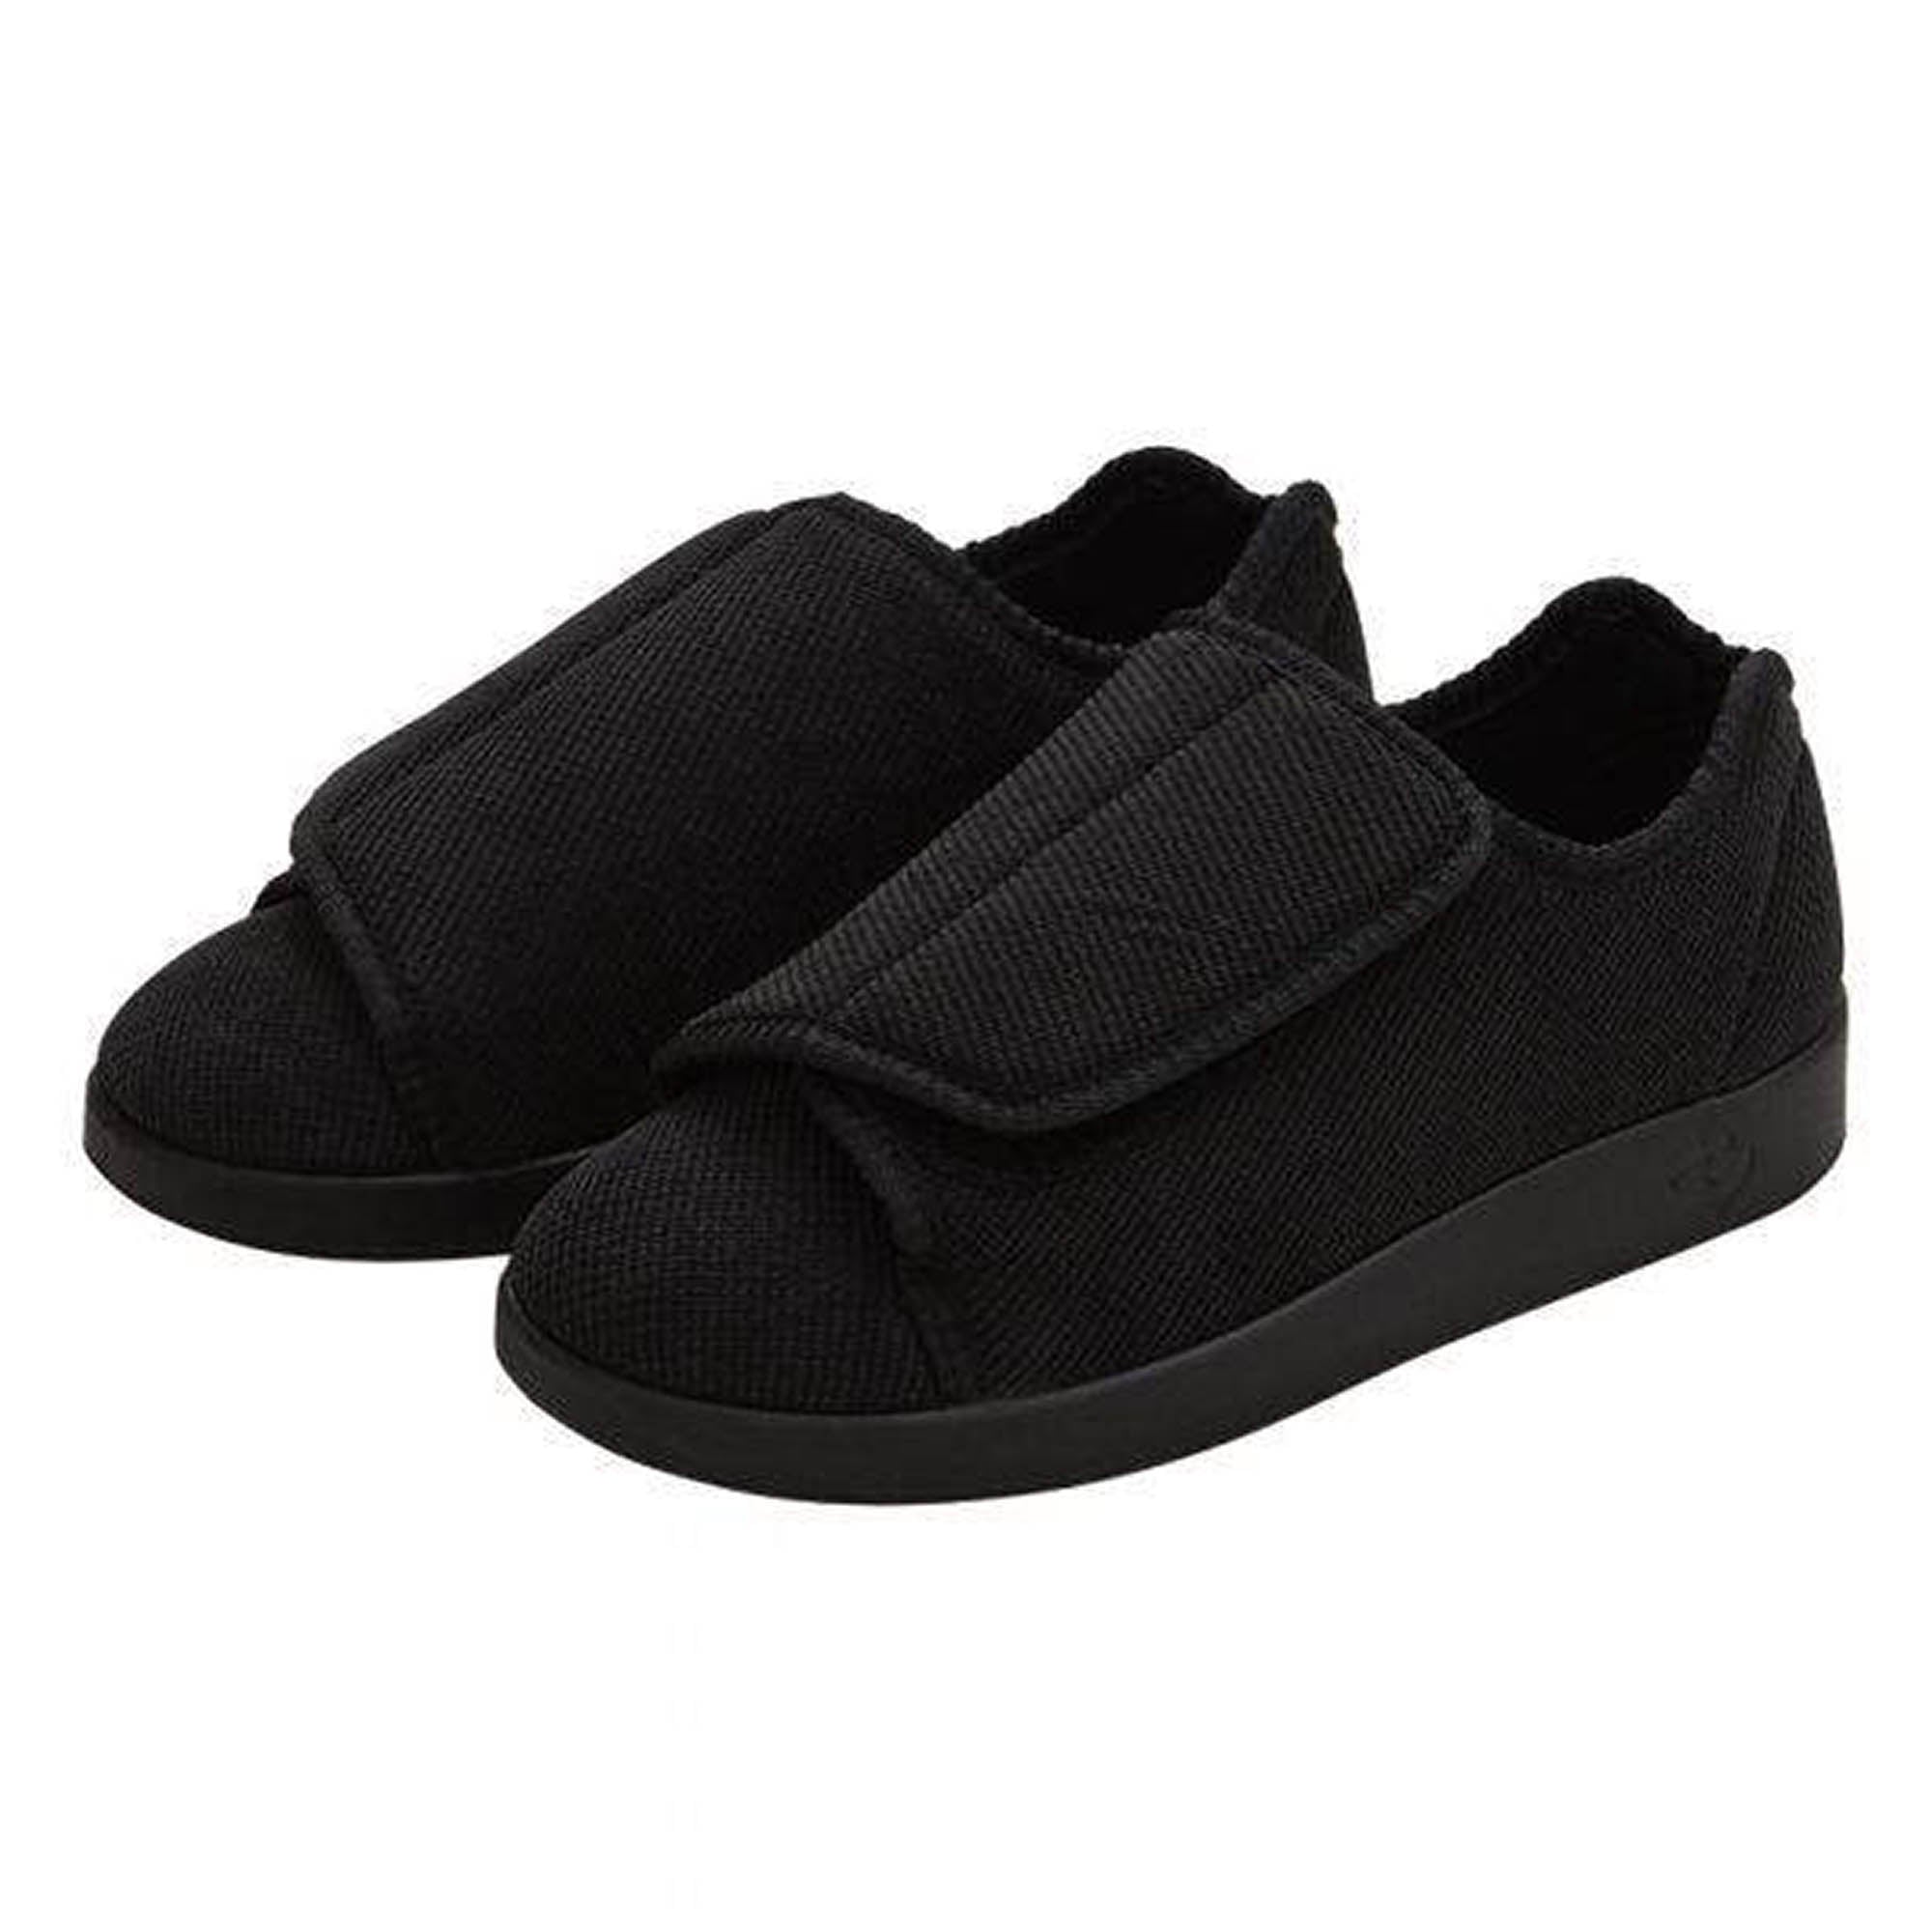 Silverts Women's Antimicrobial Extra Extra Wide Easy-Closure Slippers - Black - 9